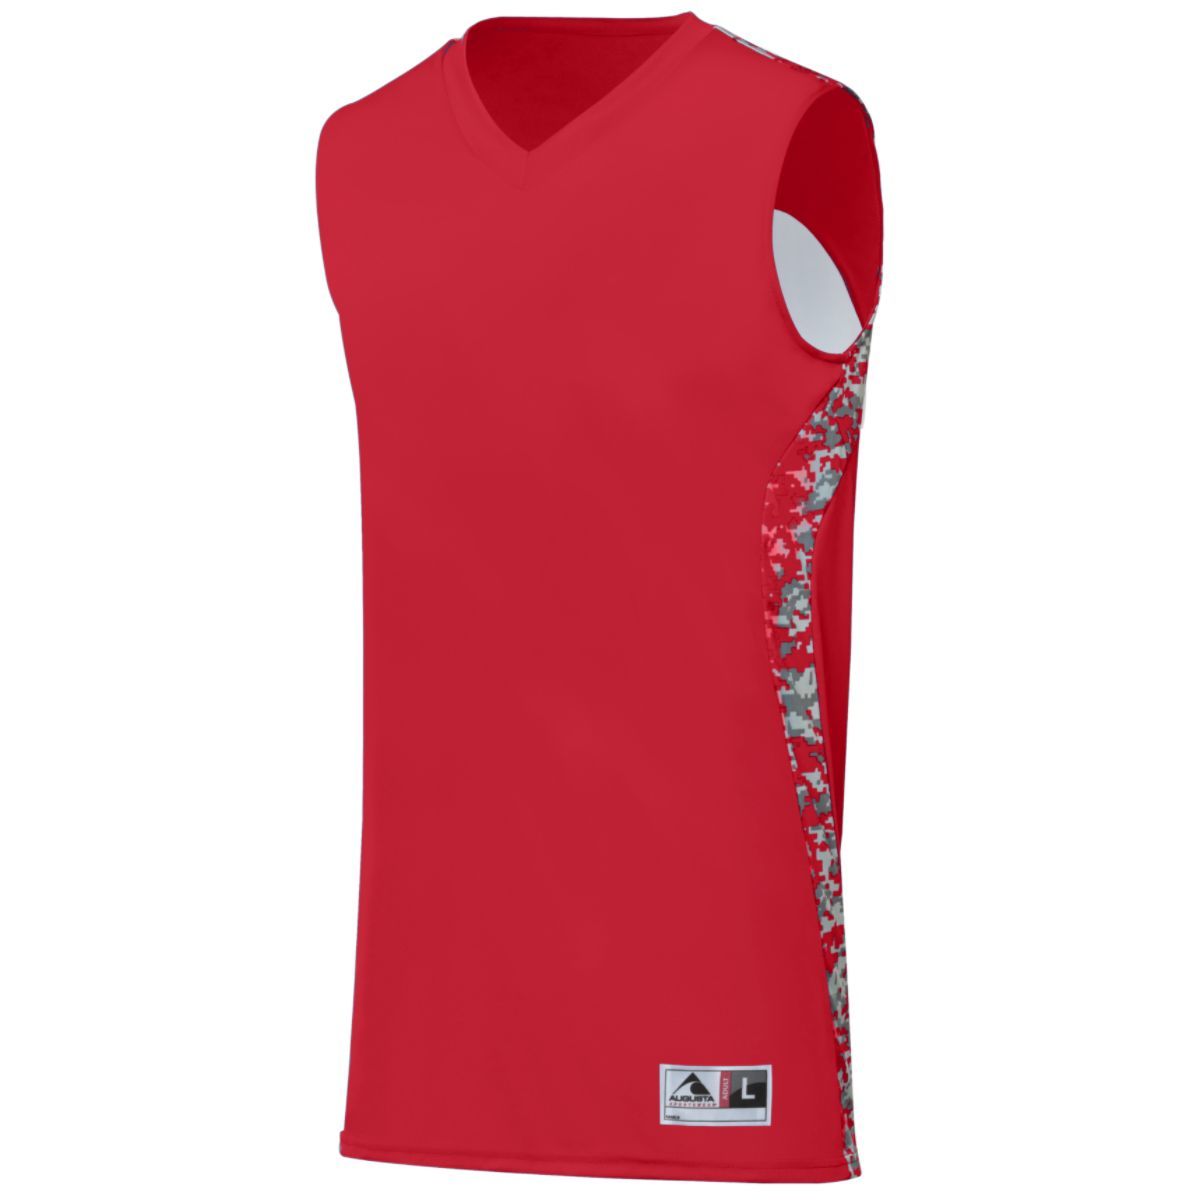 Augusta Sportswear Youth Hook Shot Reversible Jersey in Red/Red Digi  -Part of the Youth, Youth-Jersey, Augusta-Products, Basketball, Shirts, All-Sports, All-Sports-1 product lines at KanaleyCreations.com